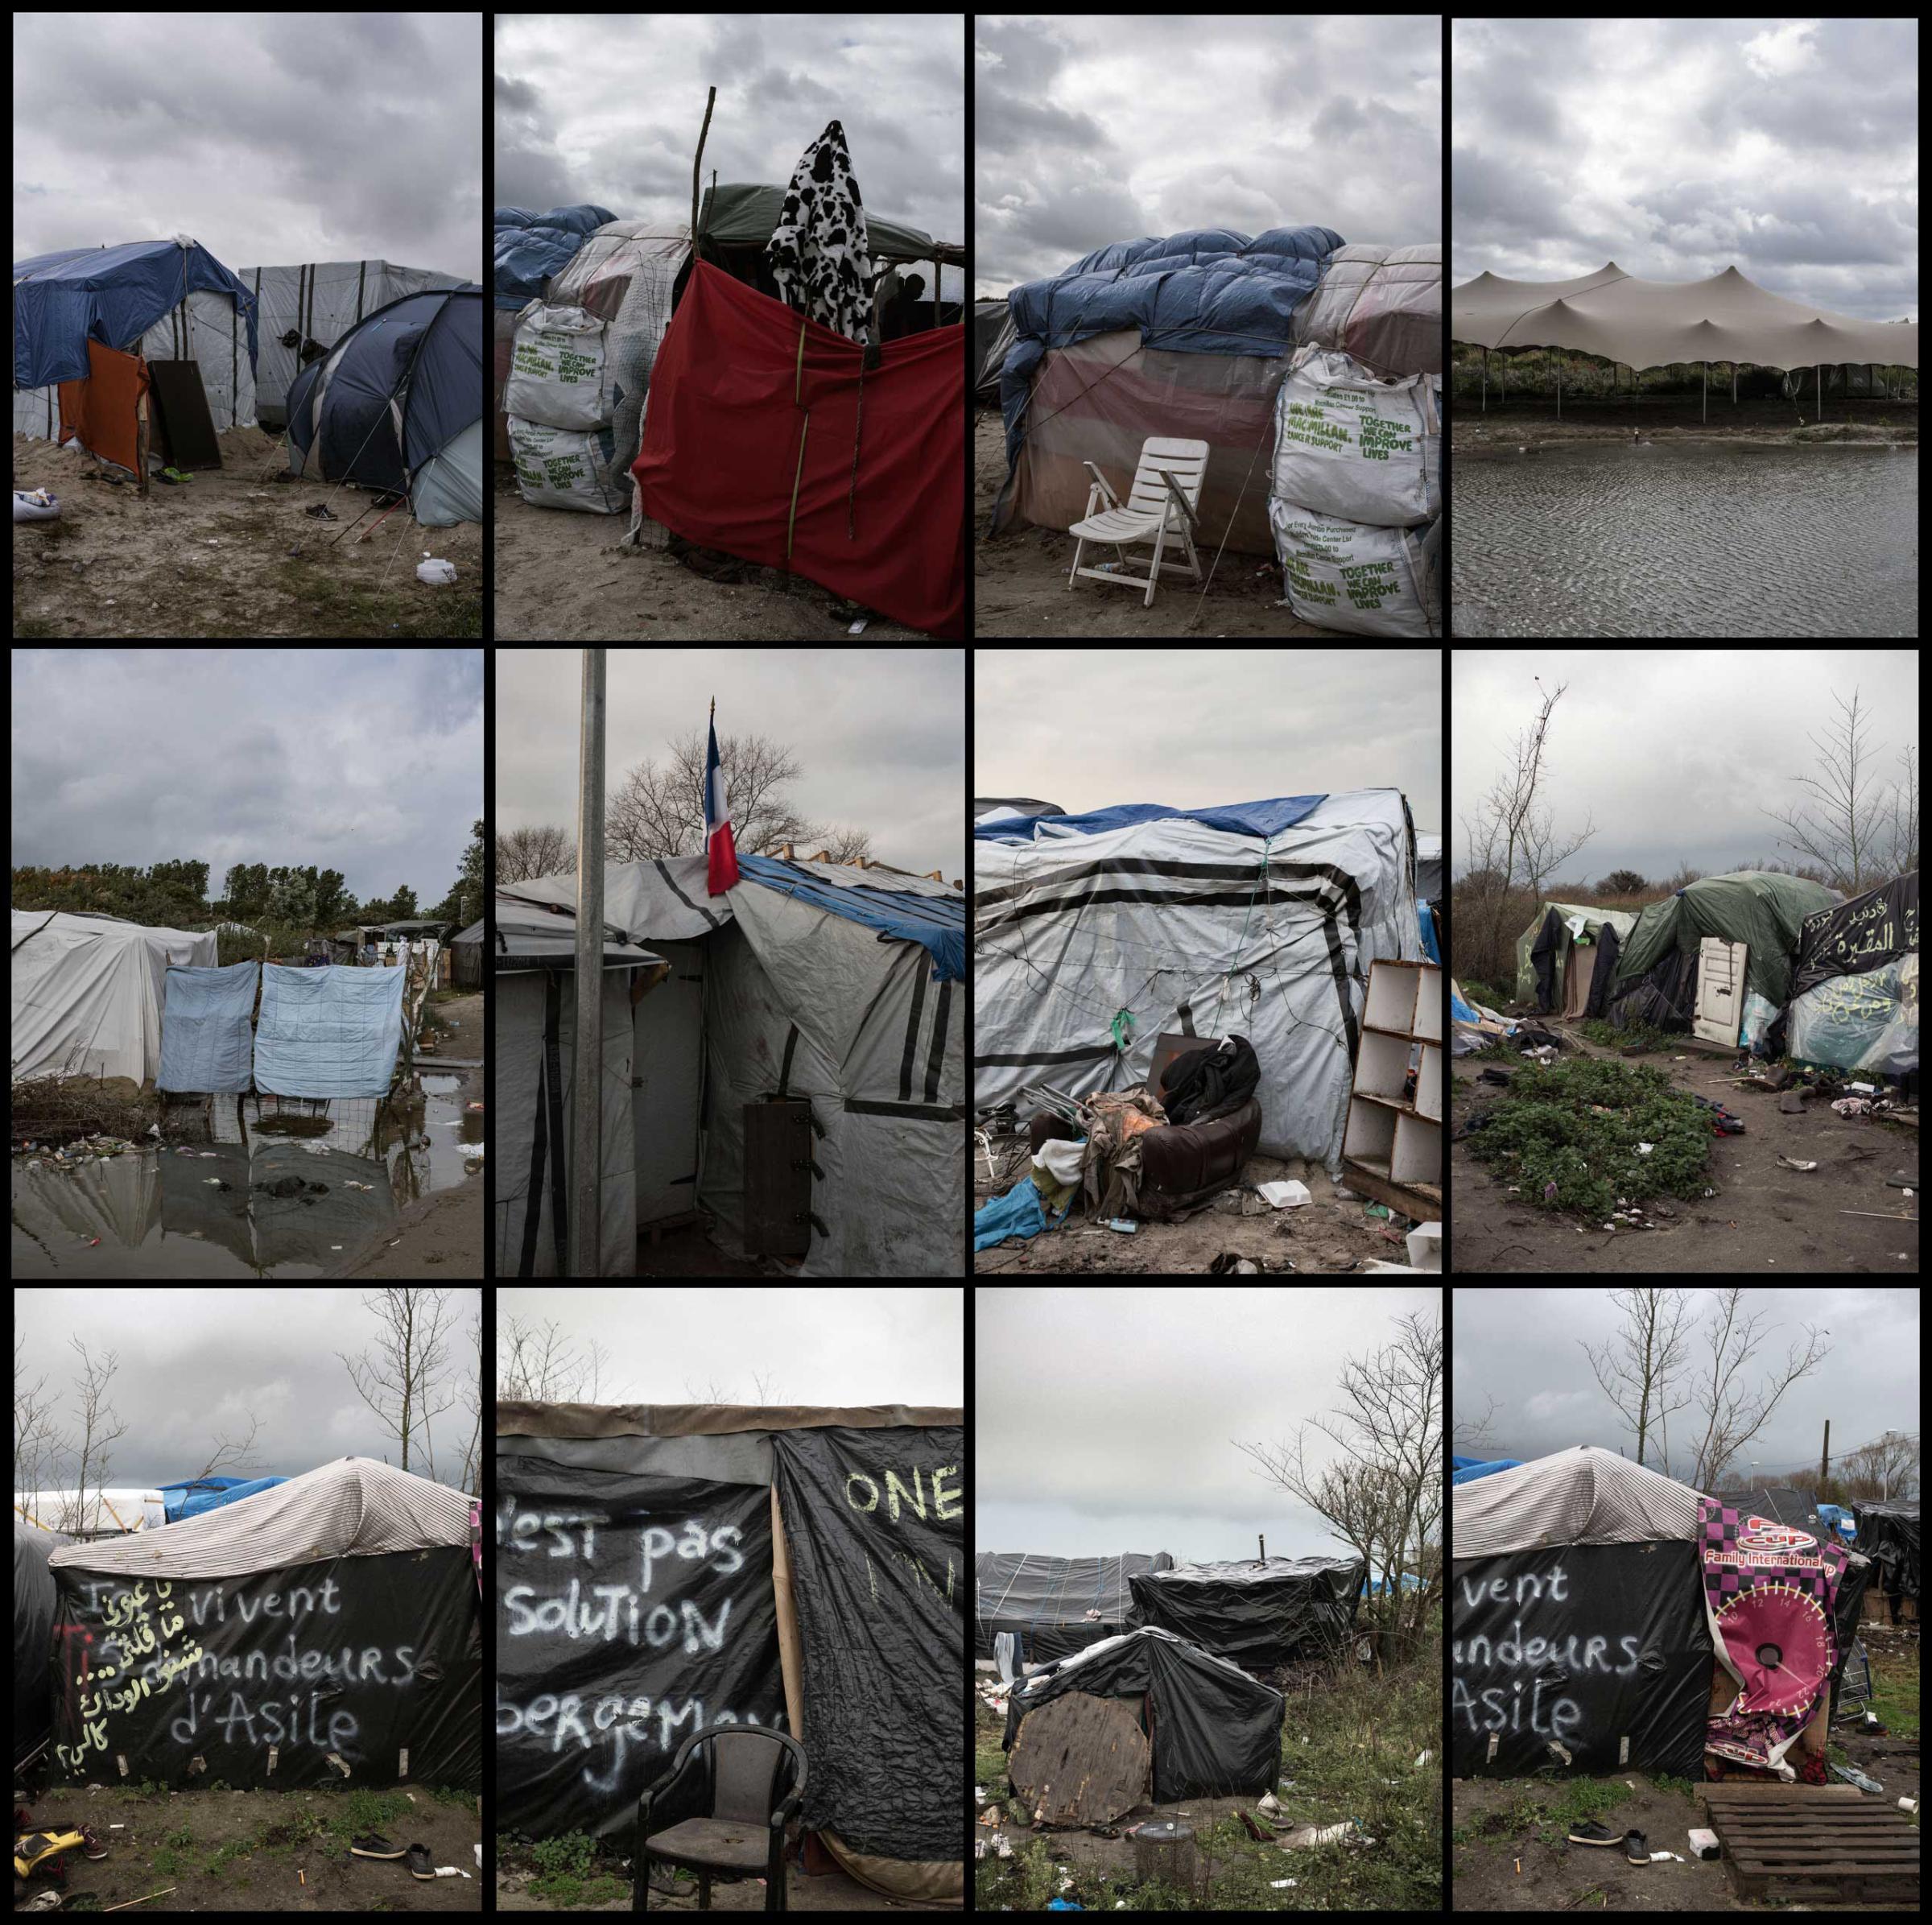 A grid showing various make-shift dwellings for migrants in the shantytown known as the "jungle" in Calais, France, where 4000 migrants, refugees, and asylum seekers have sought shelter before attempting to make their way to the United Kingdom, 2015.